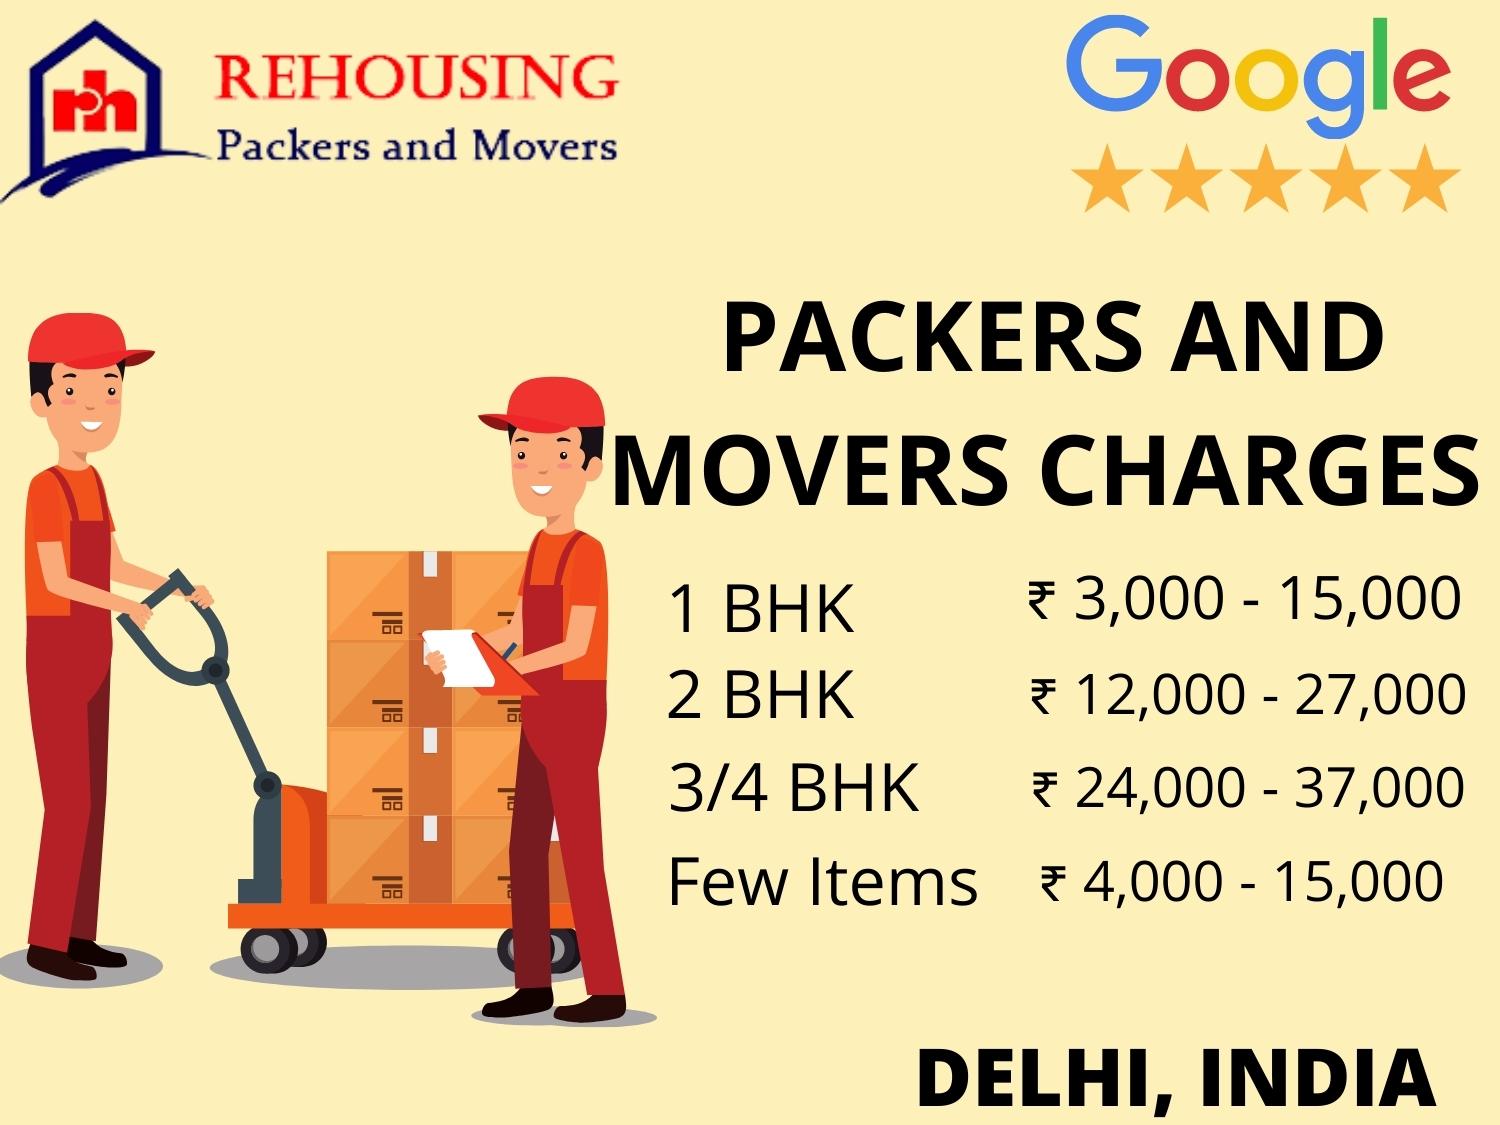 Services by Rehousing packers and movers